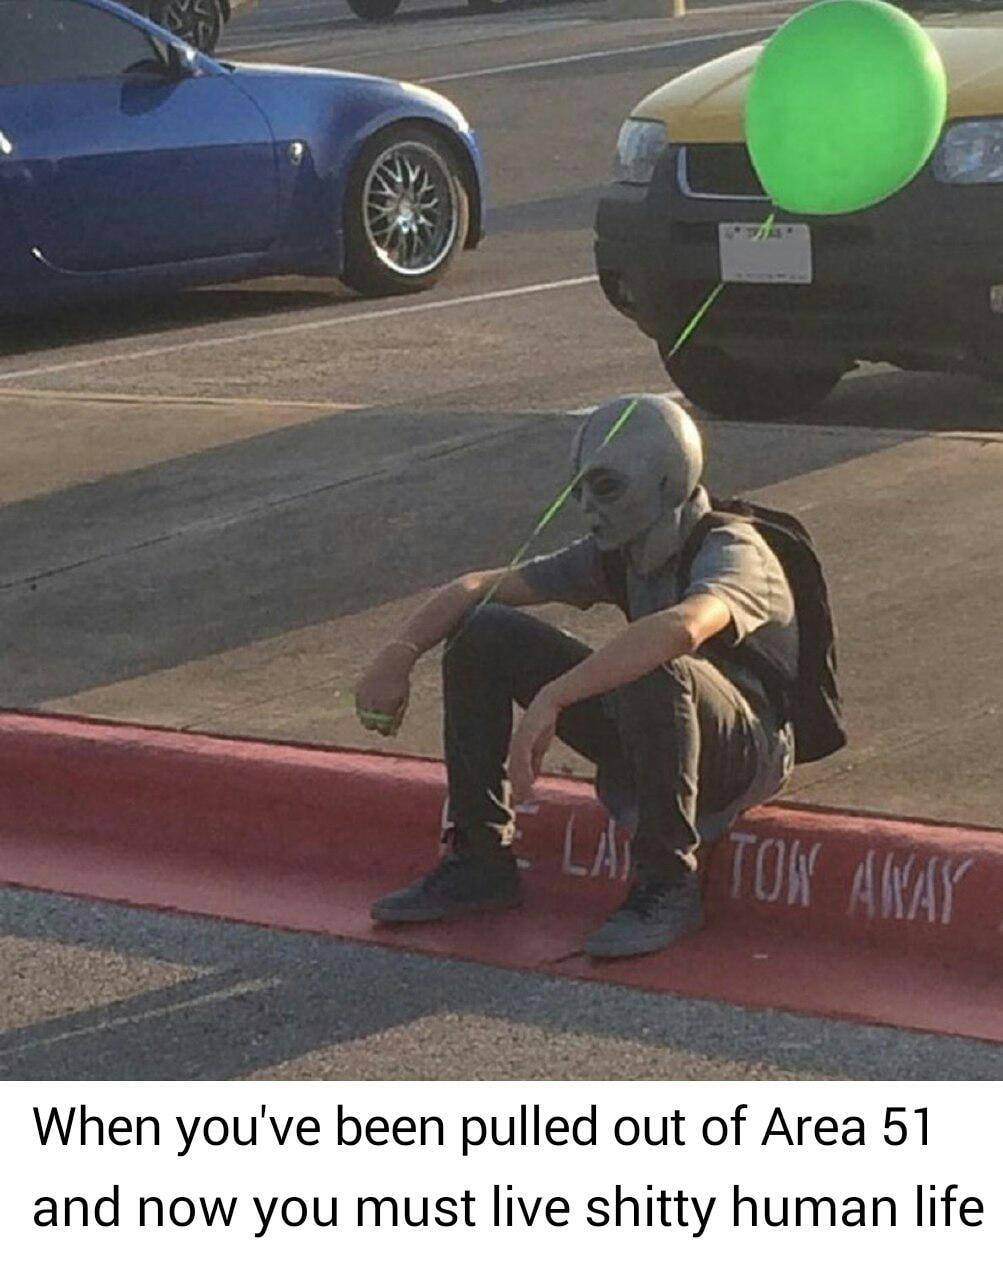 Unemployment haunts immigrant ET, recently released from Area 51 - meme